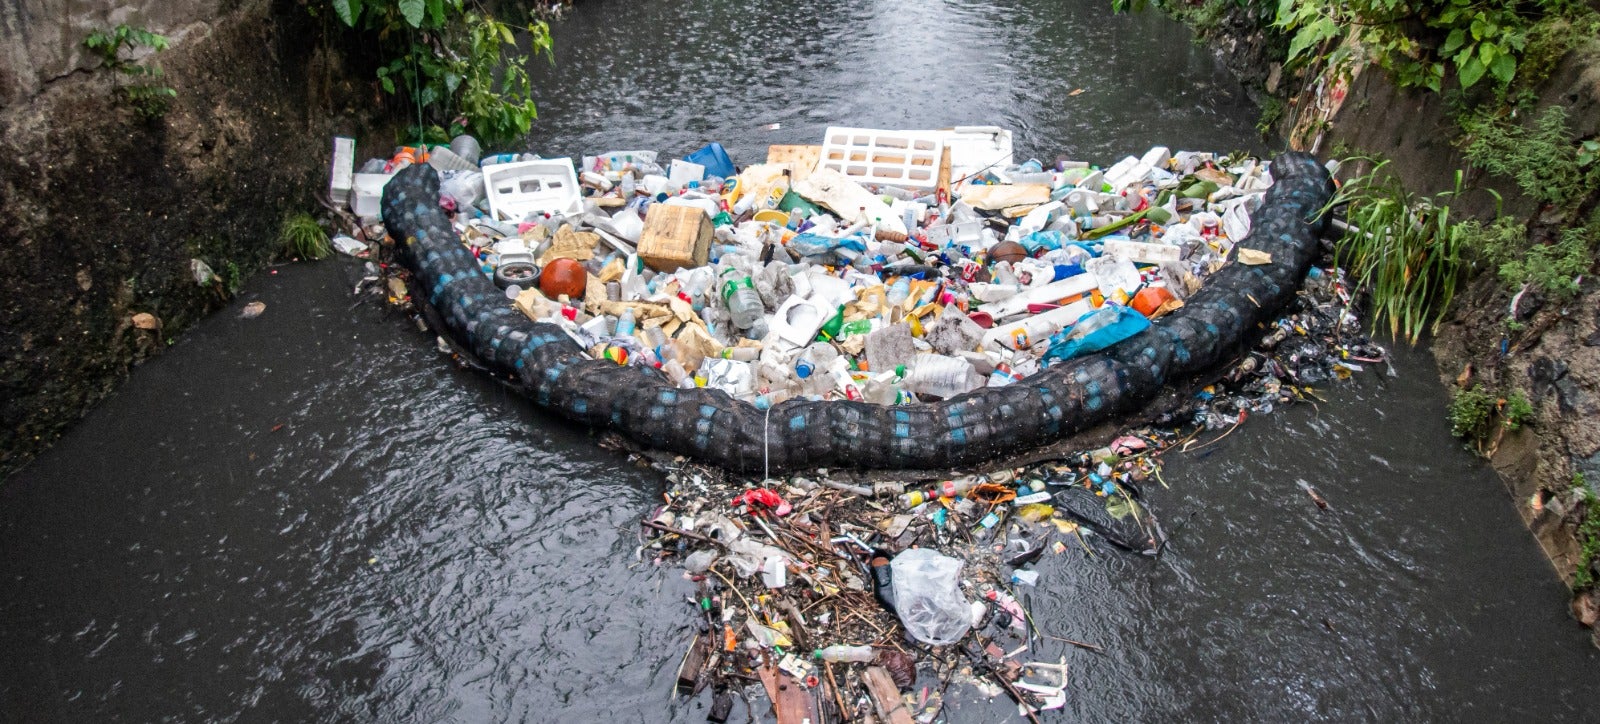 Low cost garbage filtering system that catches all forms of rubbish in a dirty flowing river in Cebu City, Philippines.